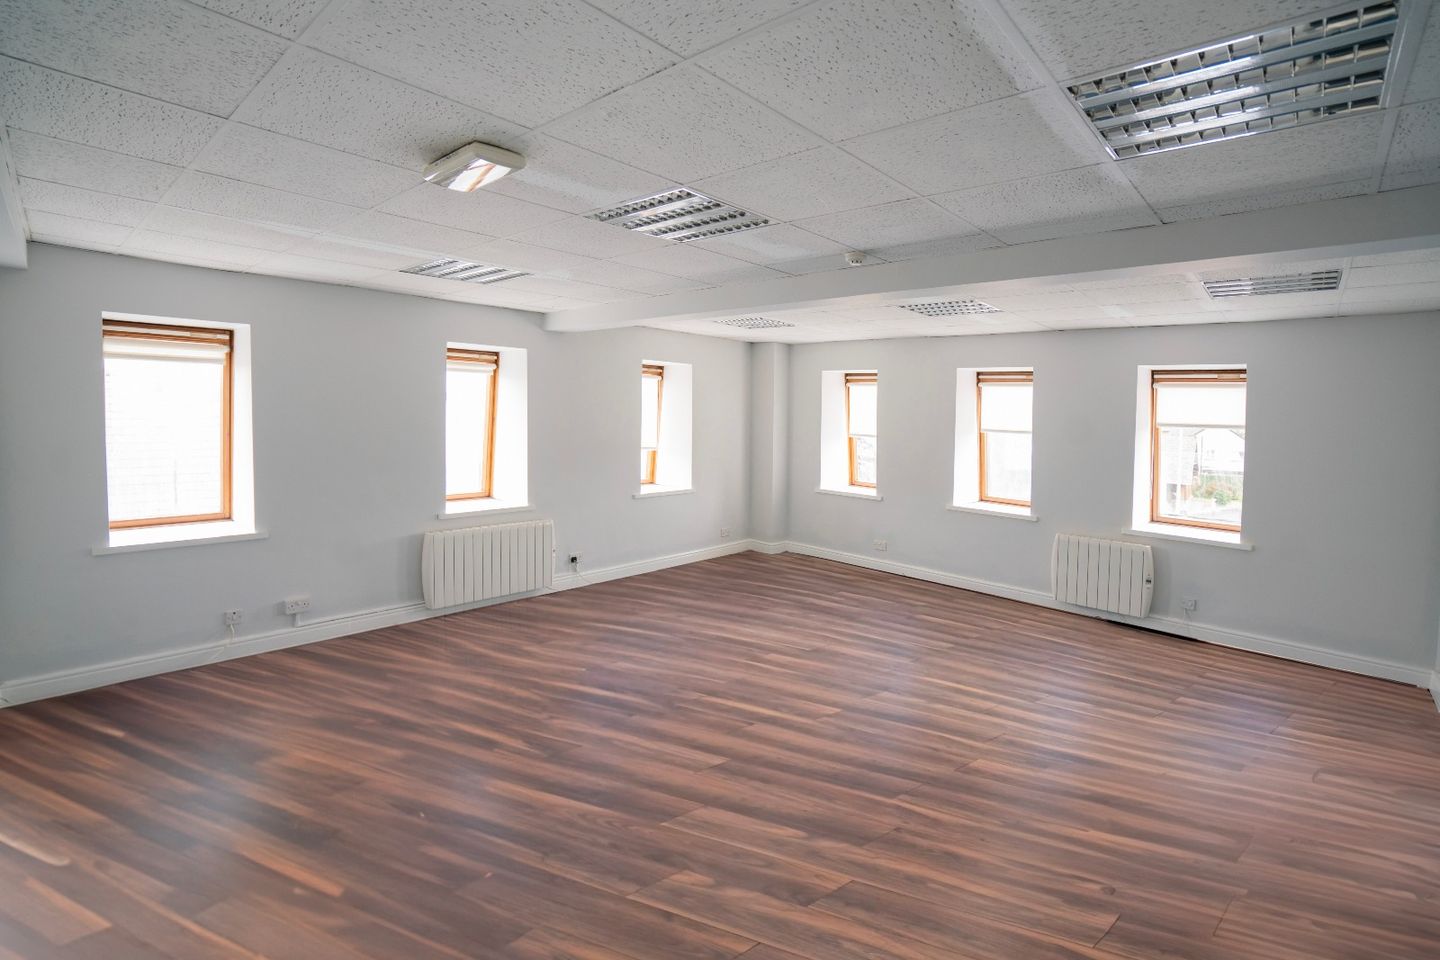 Unit 1,87 Upper O'connell Street,Ennis,Co. Clare, Ennis, Co. Clare